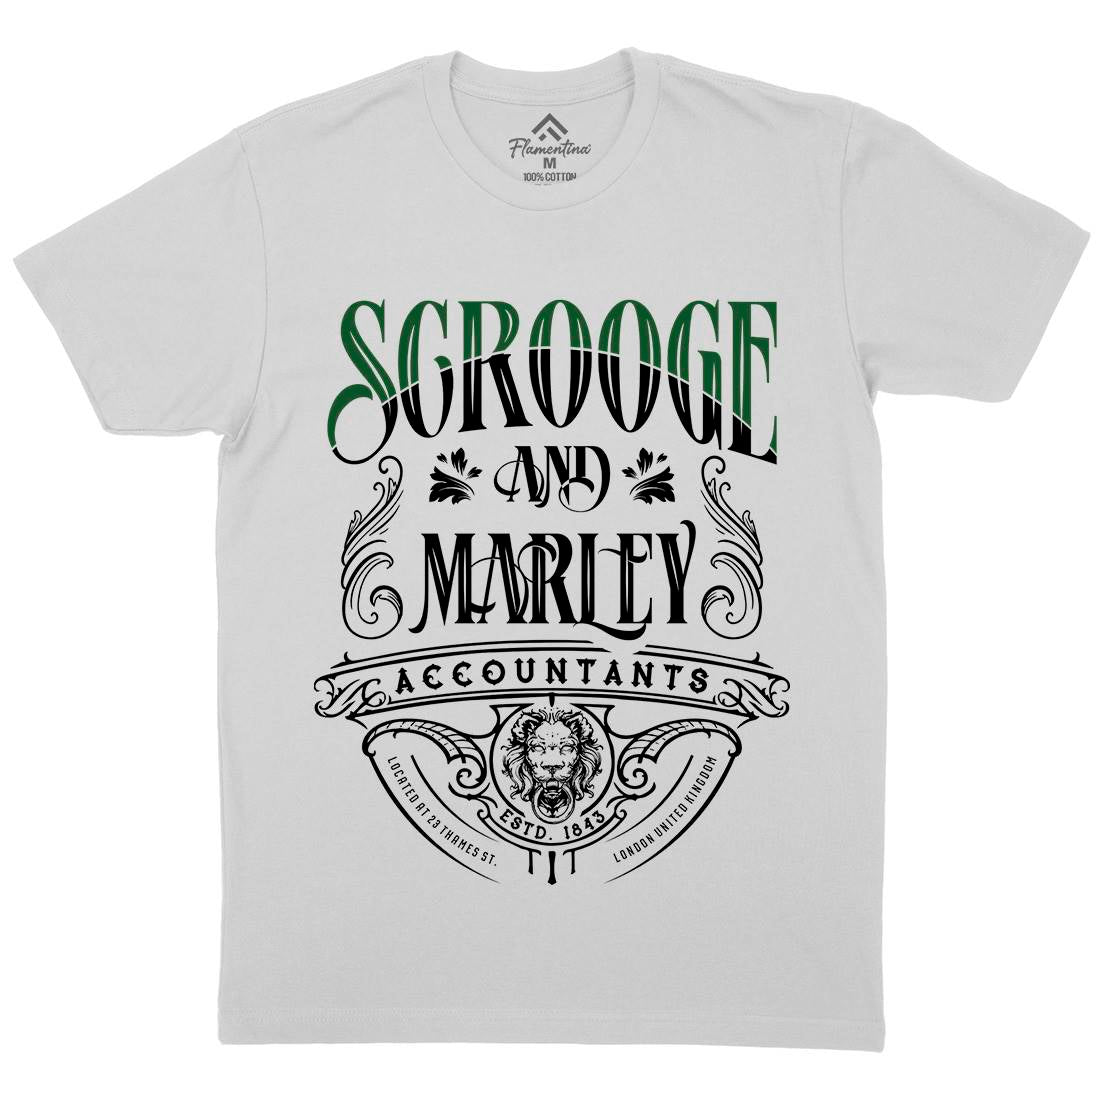 Scrooge And Marley Mens Crew Neck T-Shirt Christmas D100